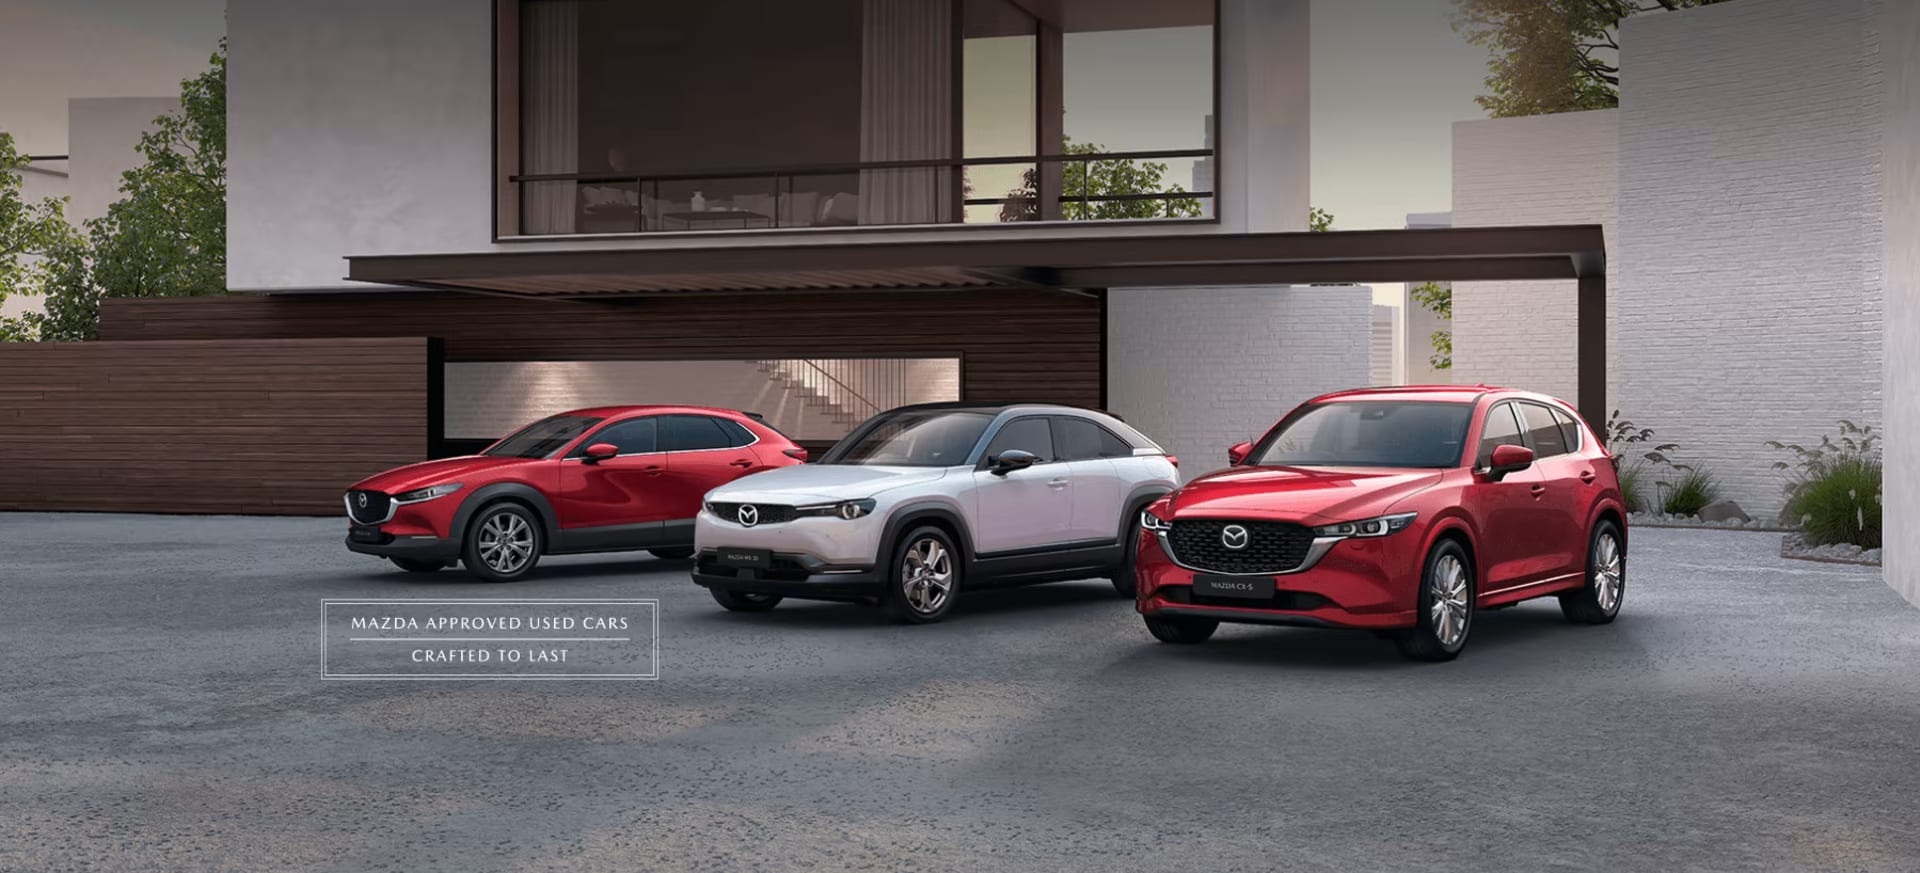 THE MAZDA APPROVED USED CAR EVENT